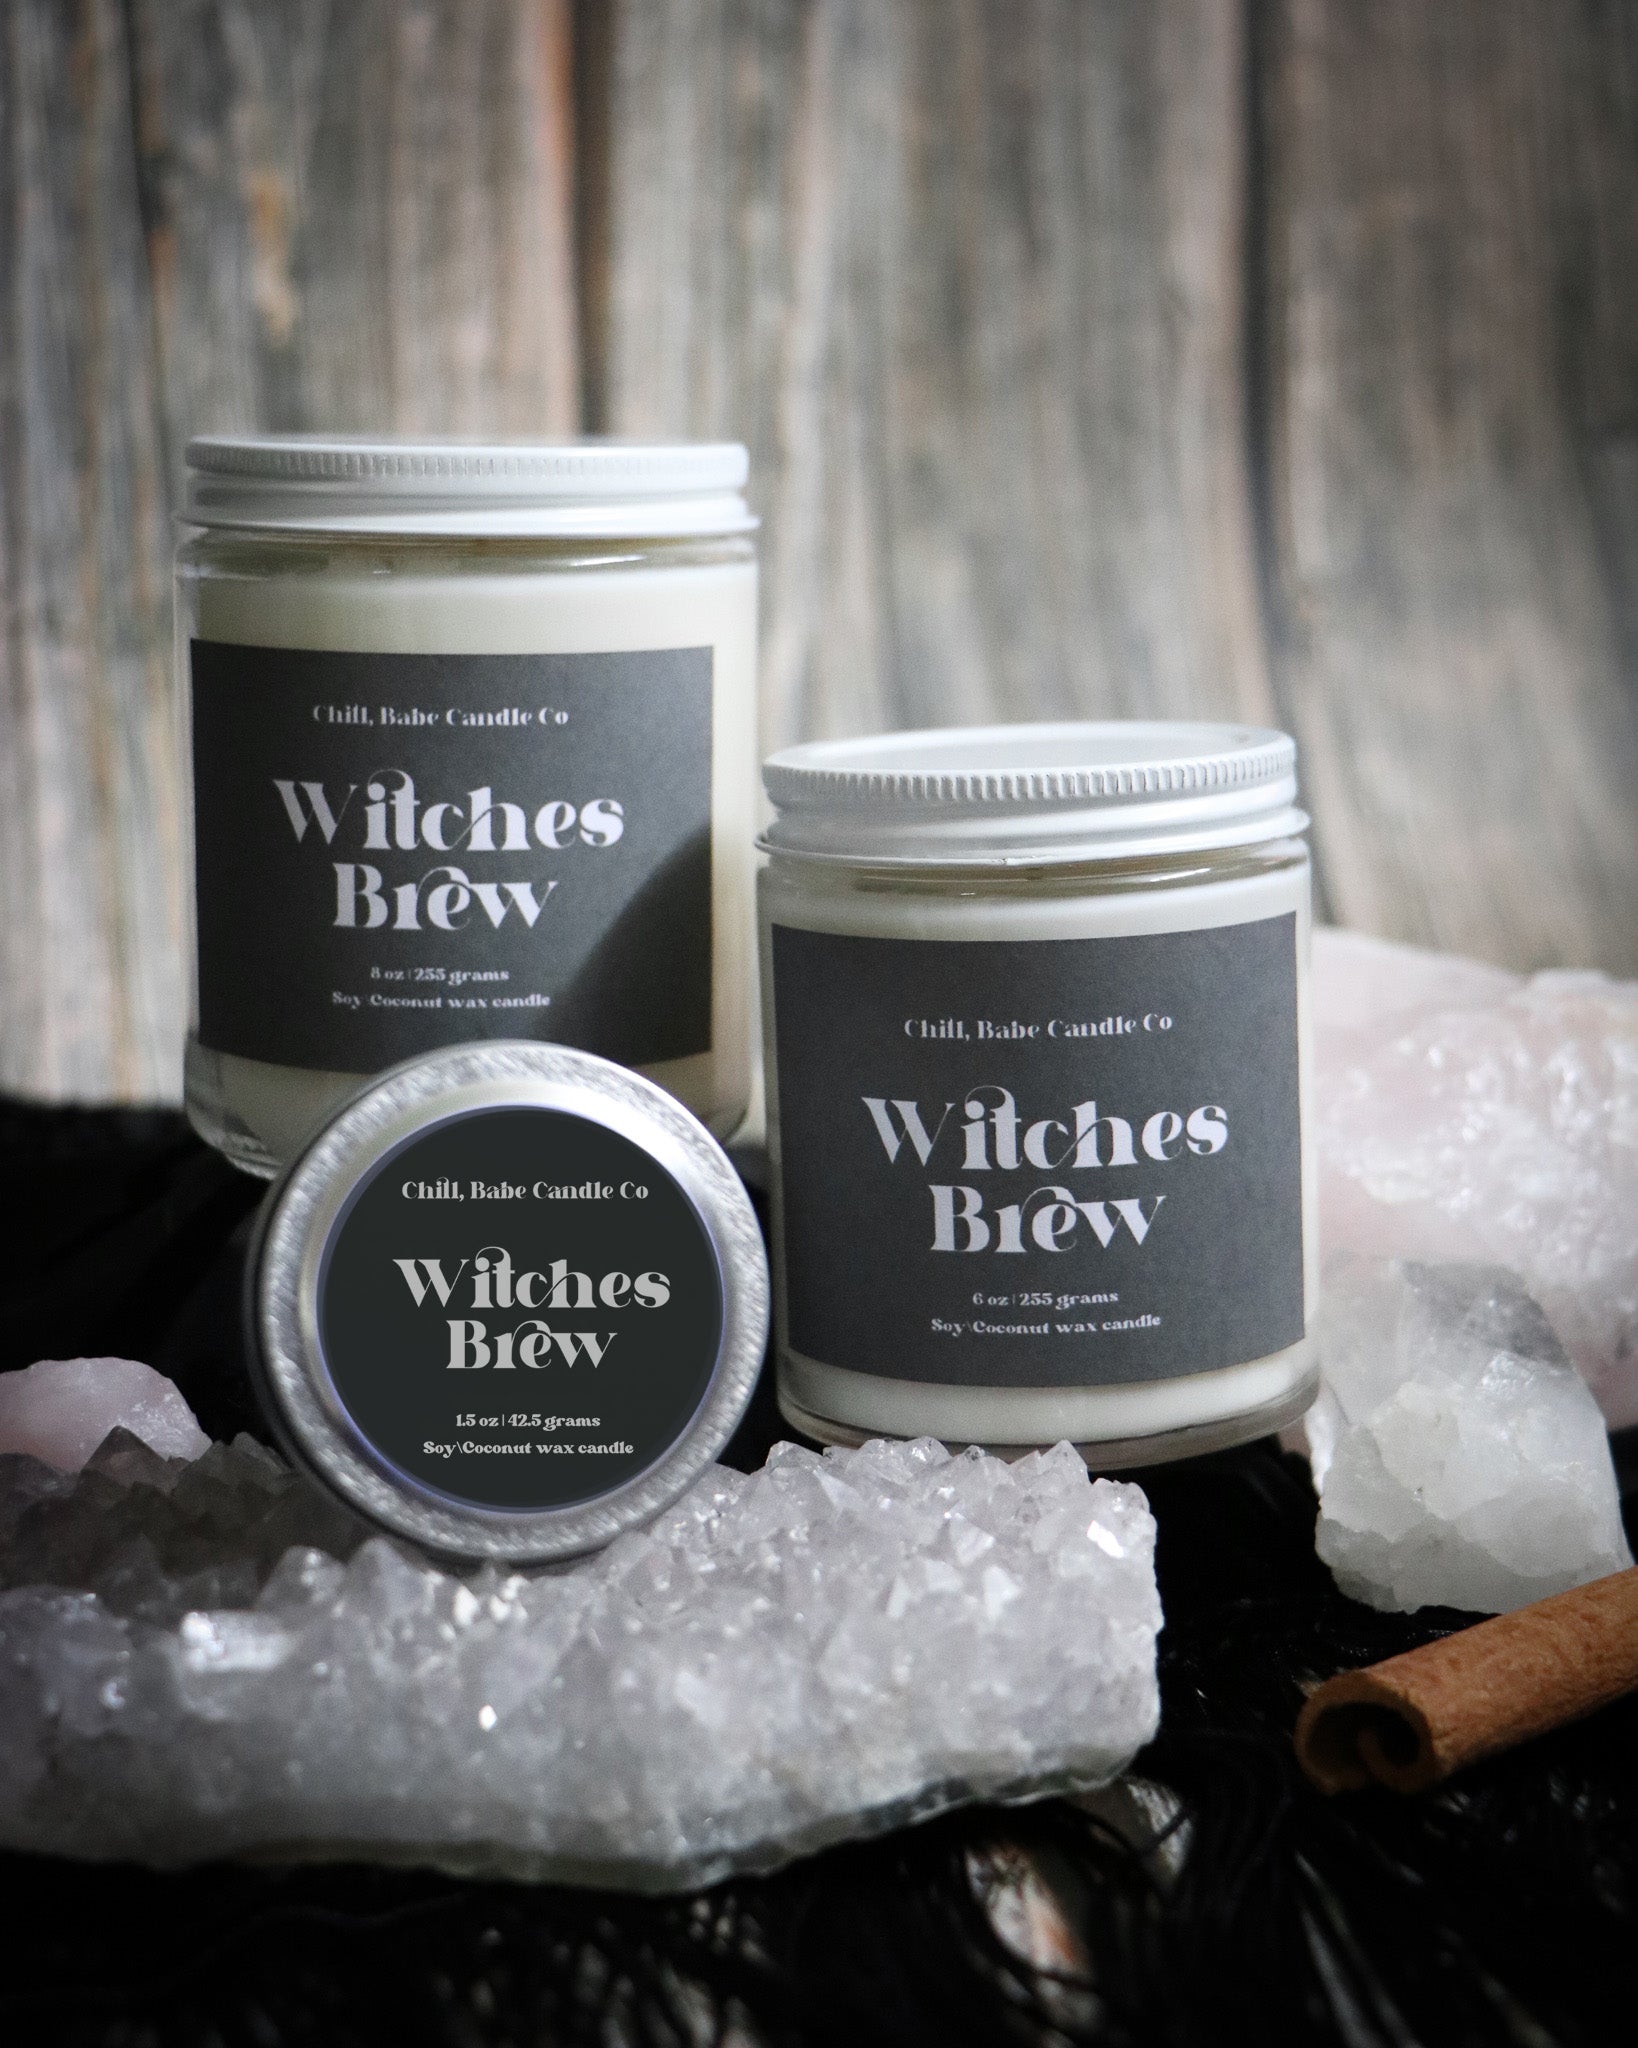 Witches Brew Candle | Cinnamon + Balsam + Patchouli